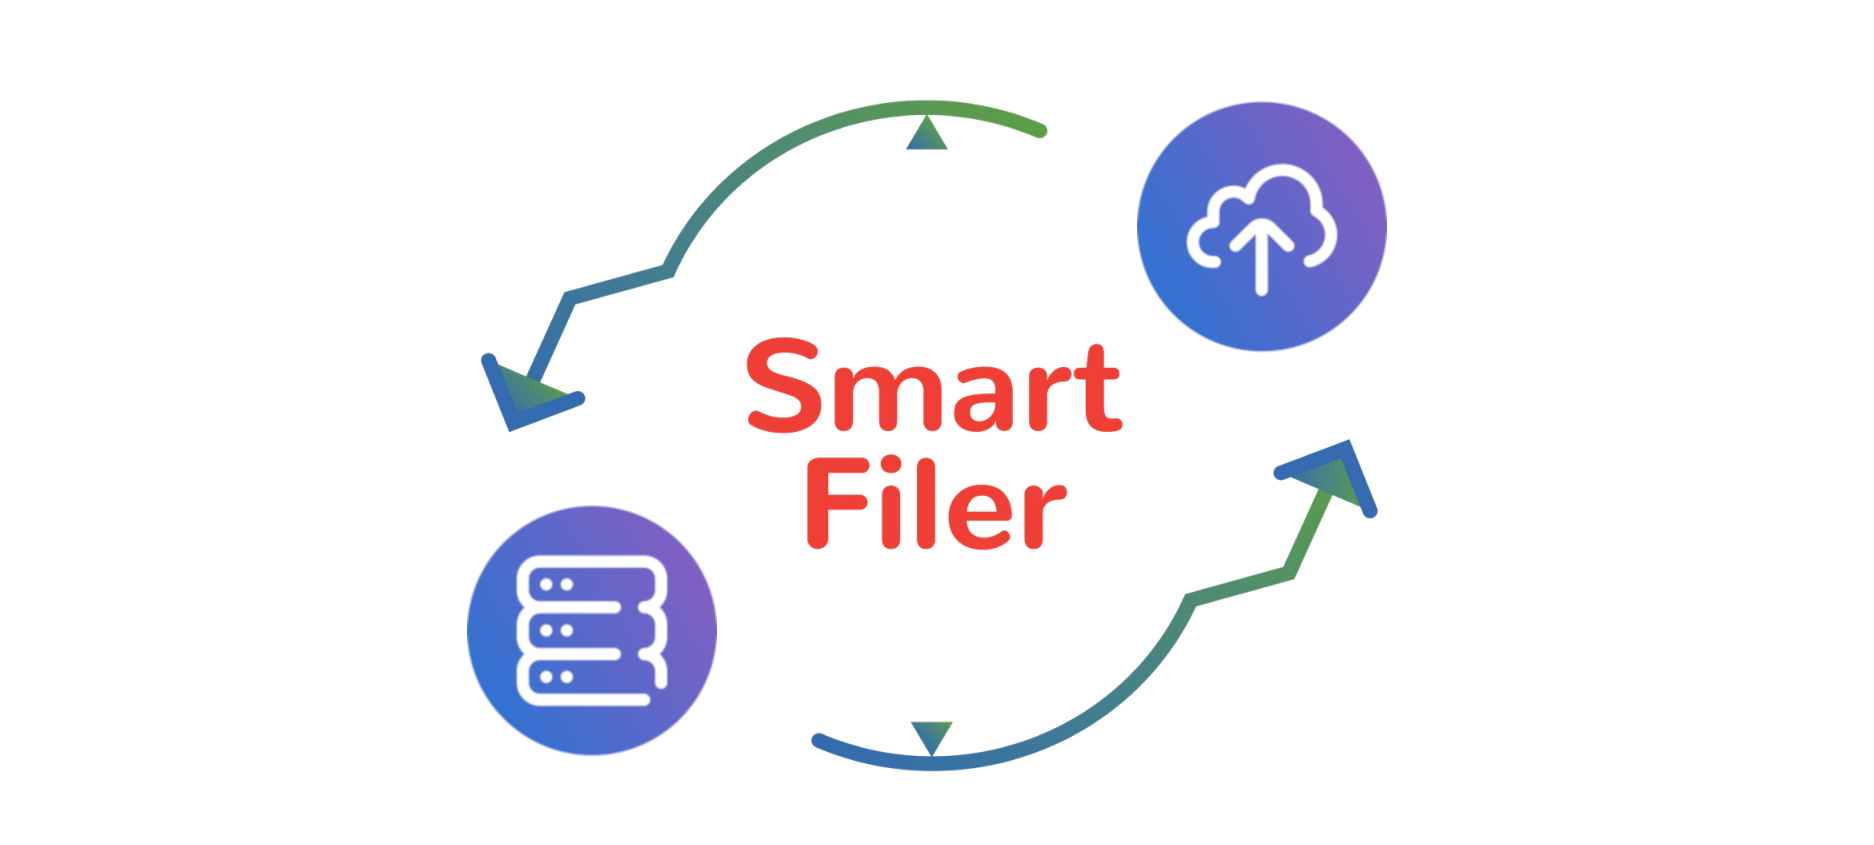 CIOs Reduce Data Storage Costs by up to 70% with Smart Filer Cold Data Management Solution